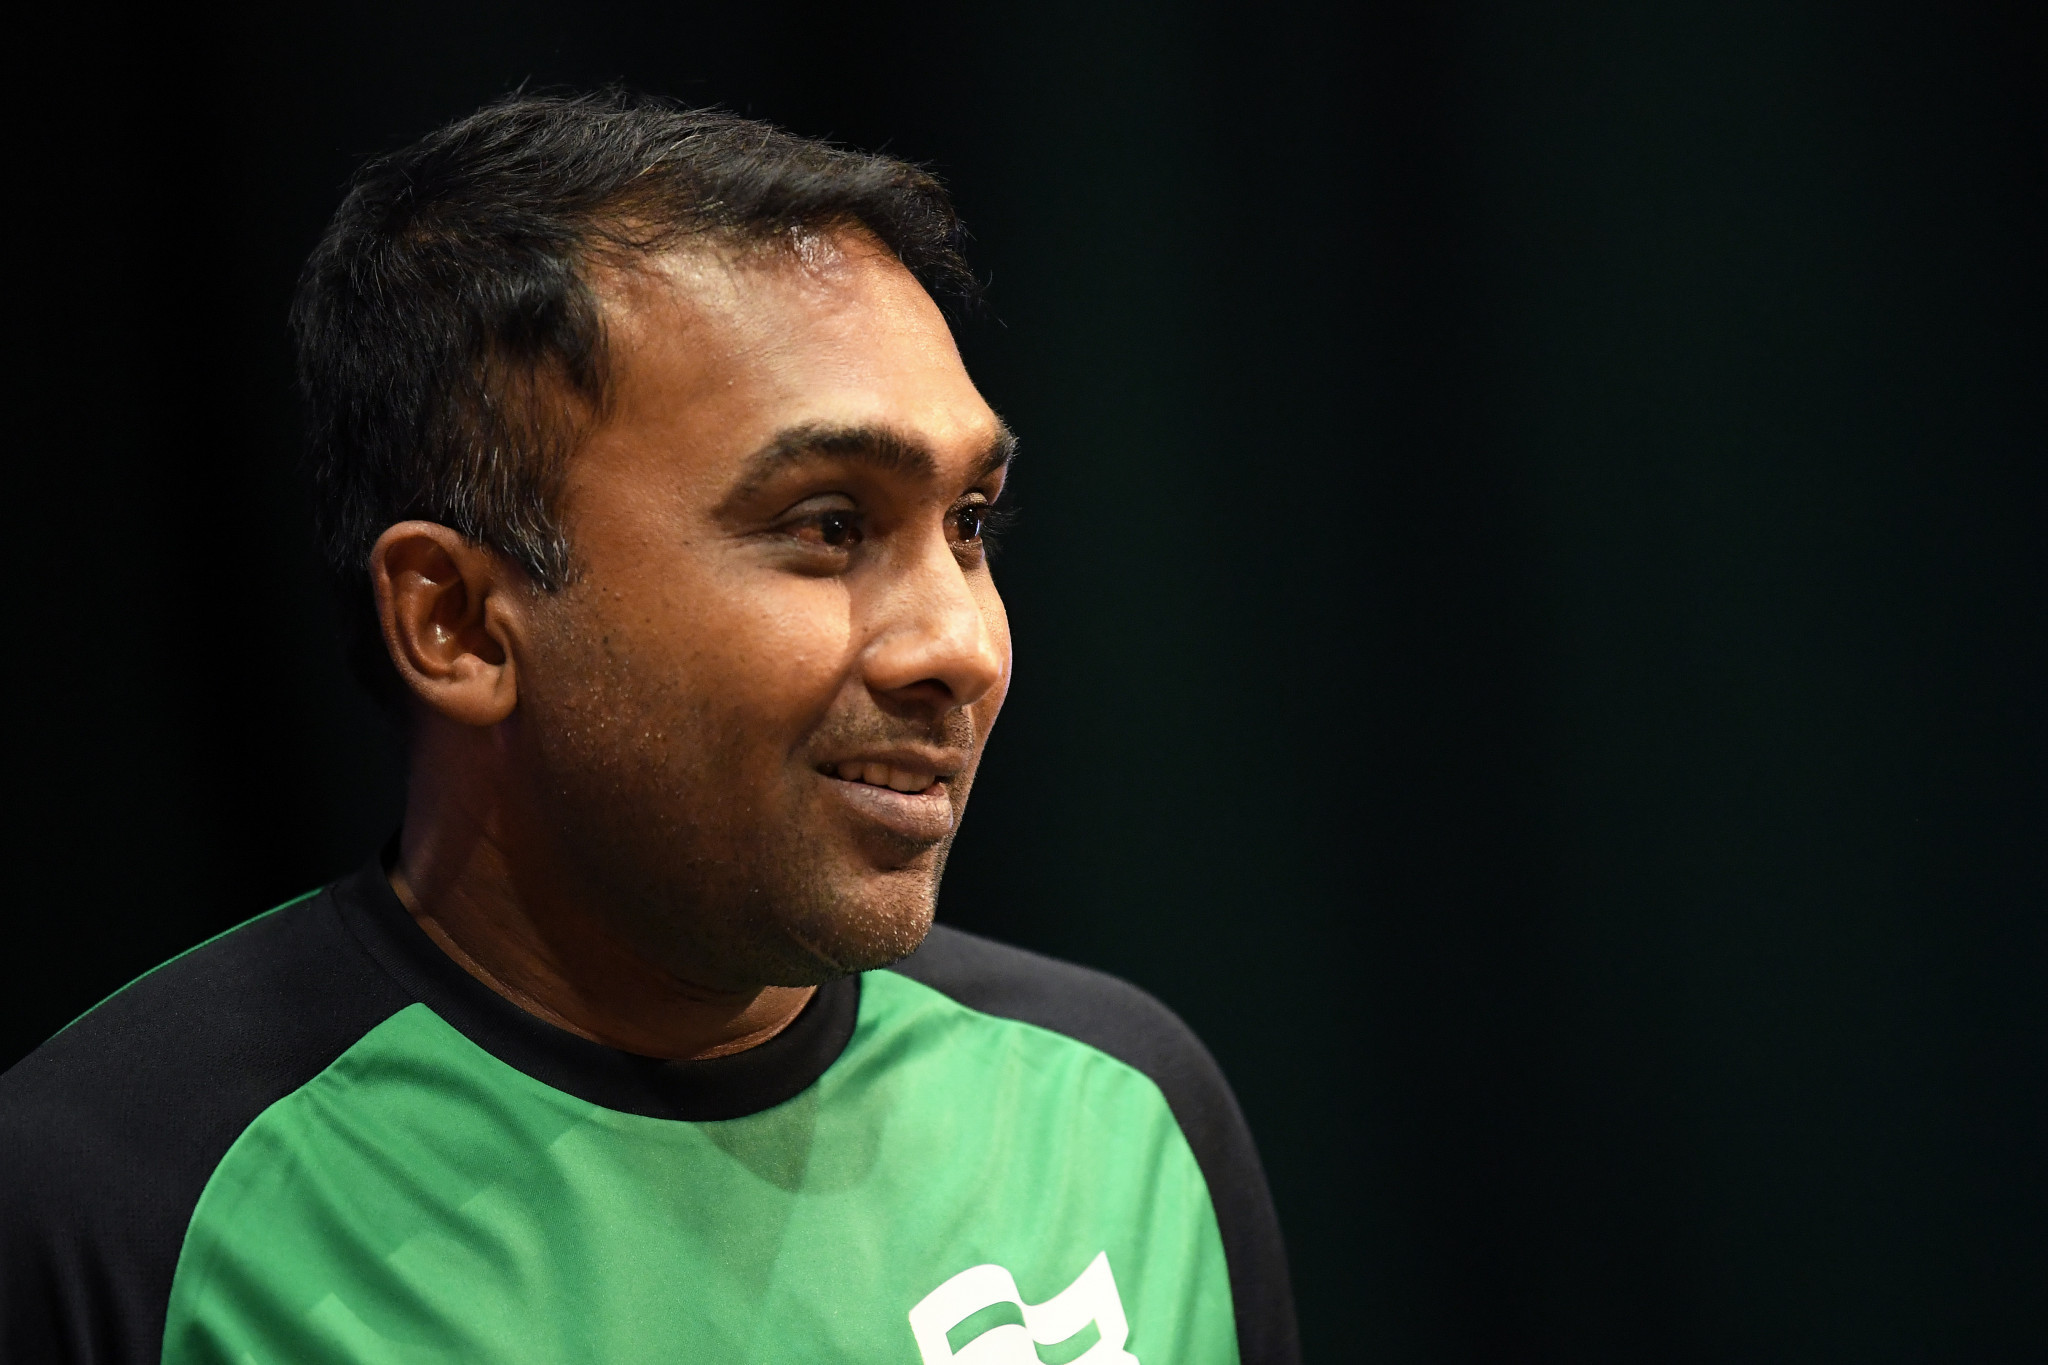 Mahela Jayawardene claimed that 100-ball cricket "would be brilliant" for the Olympics, should matches finish in under 150 minutes ©Getty Images